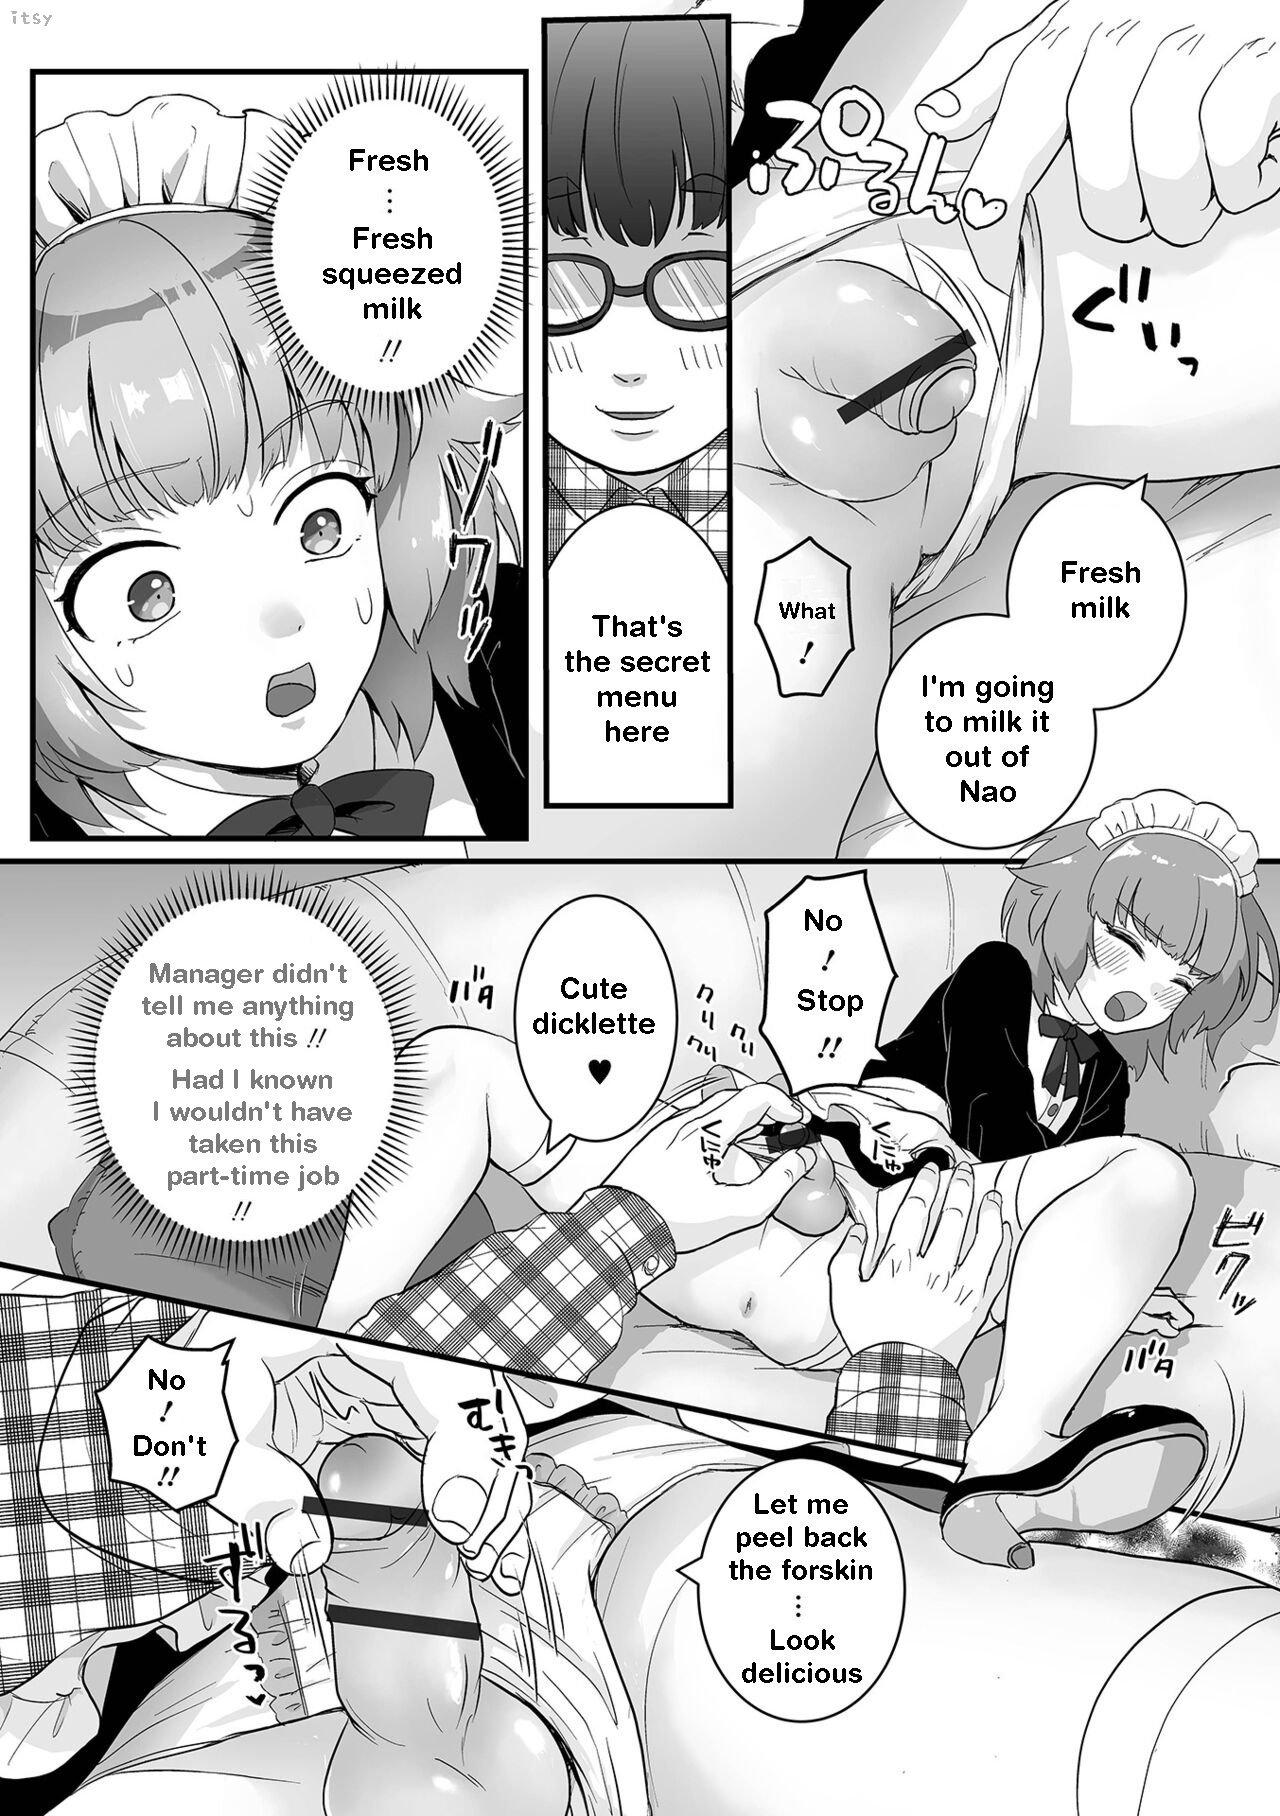 Hot Cunt Shinmai Maid Hajimete no Okyuuji | New Maid's first time Lover - Page 4